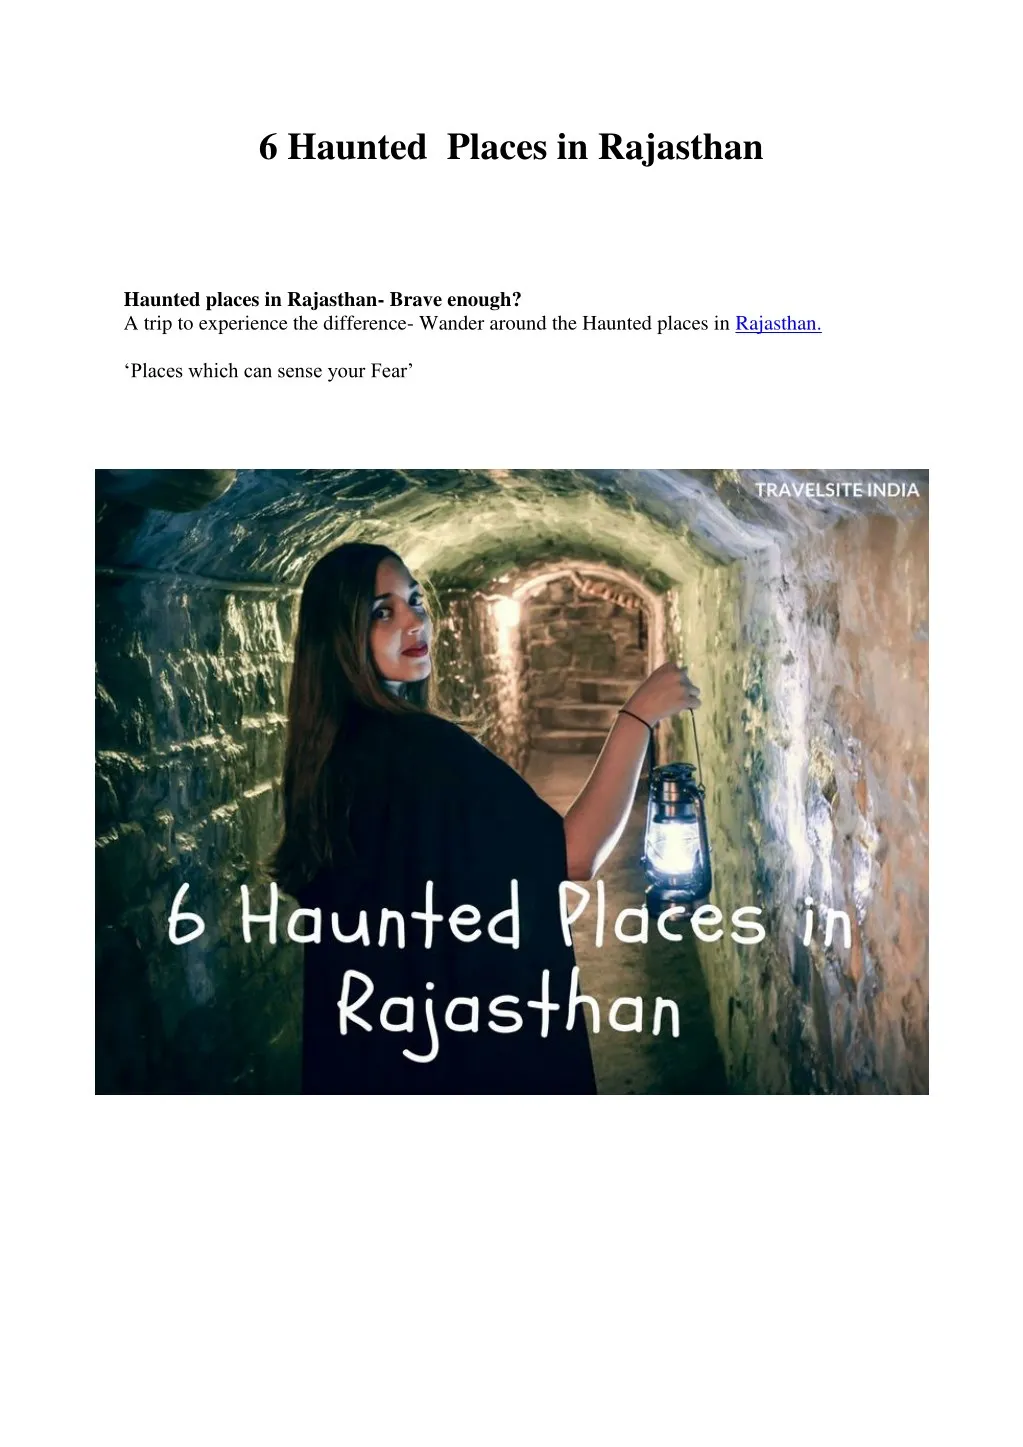 6 haunted places in rajasthan